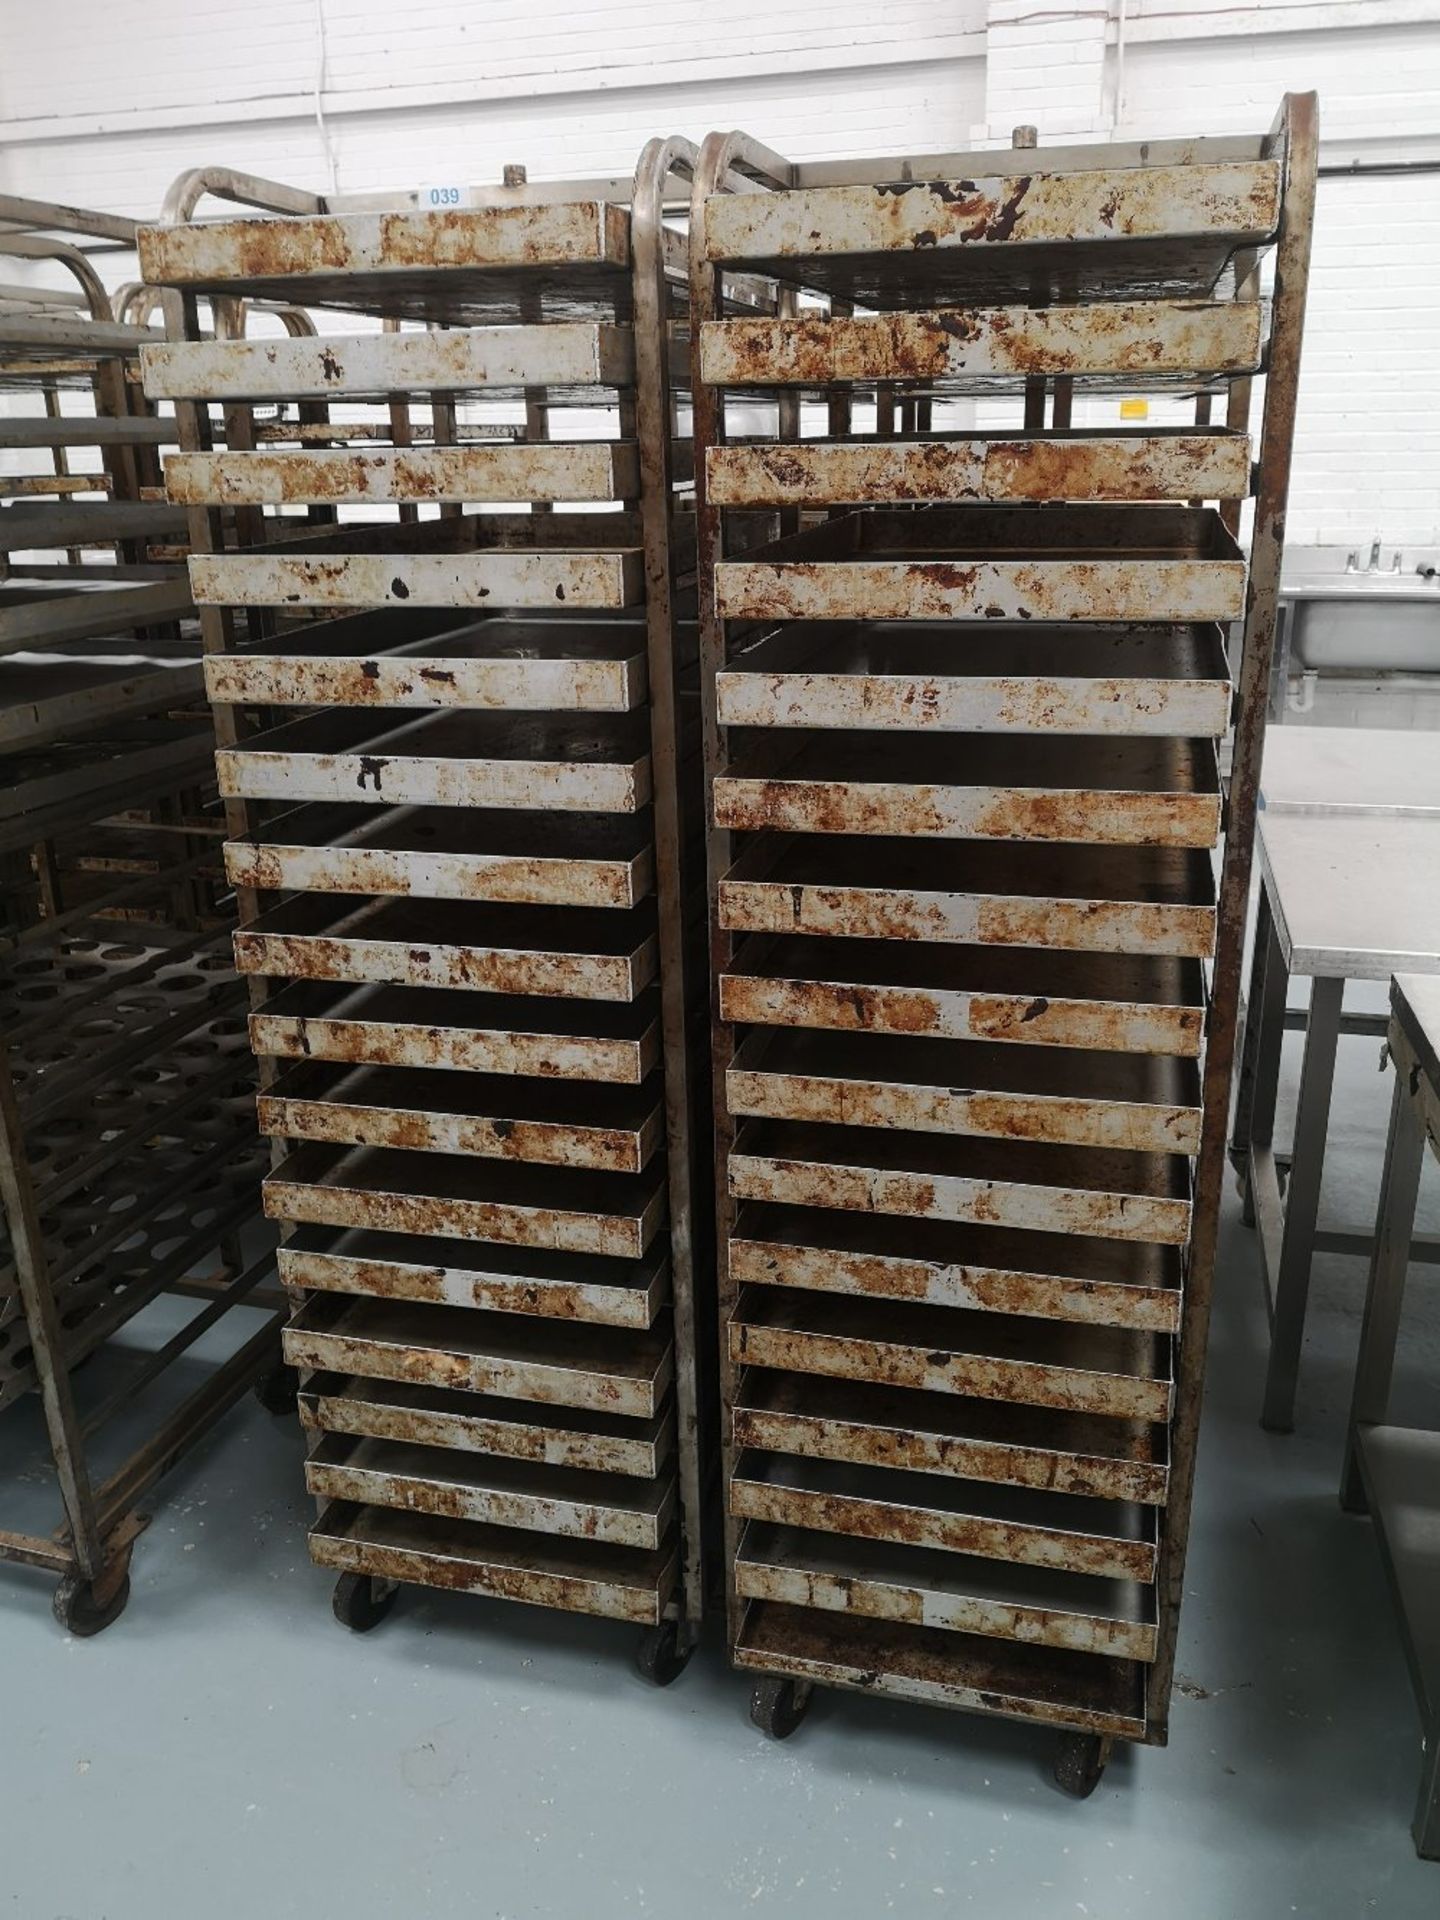 (2) Sixteen Slot Bakery Rack/Tray Stainless Steel Trollies - Image 3 of 3